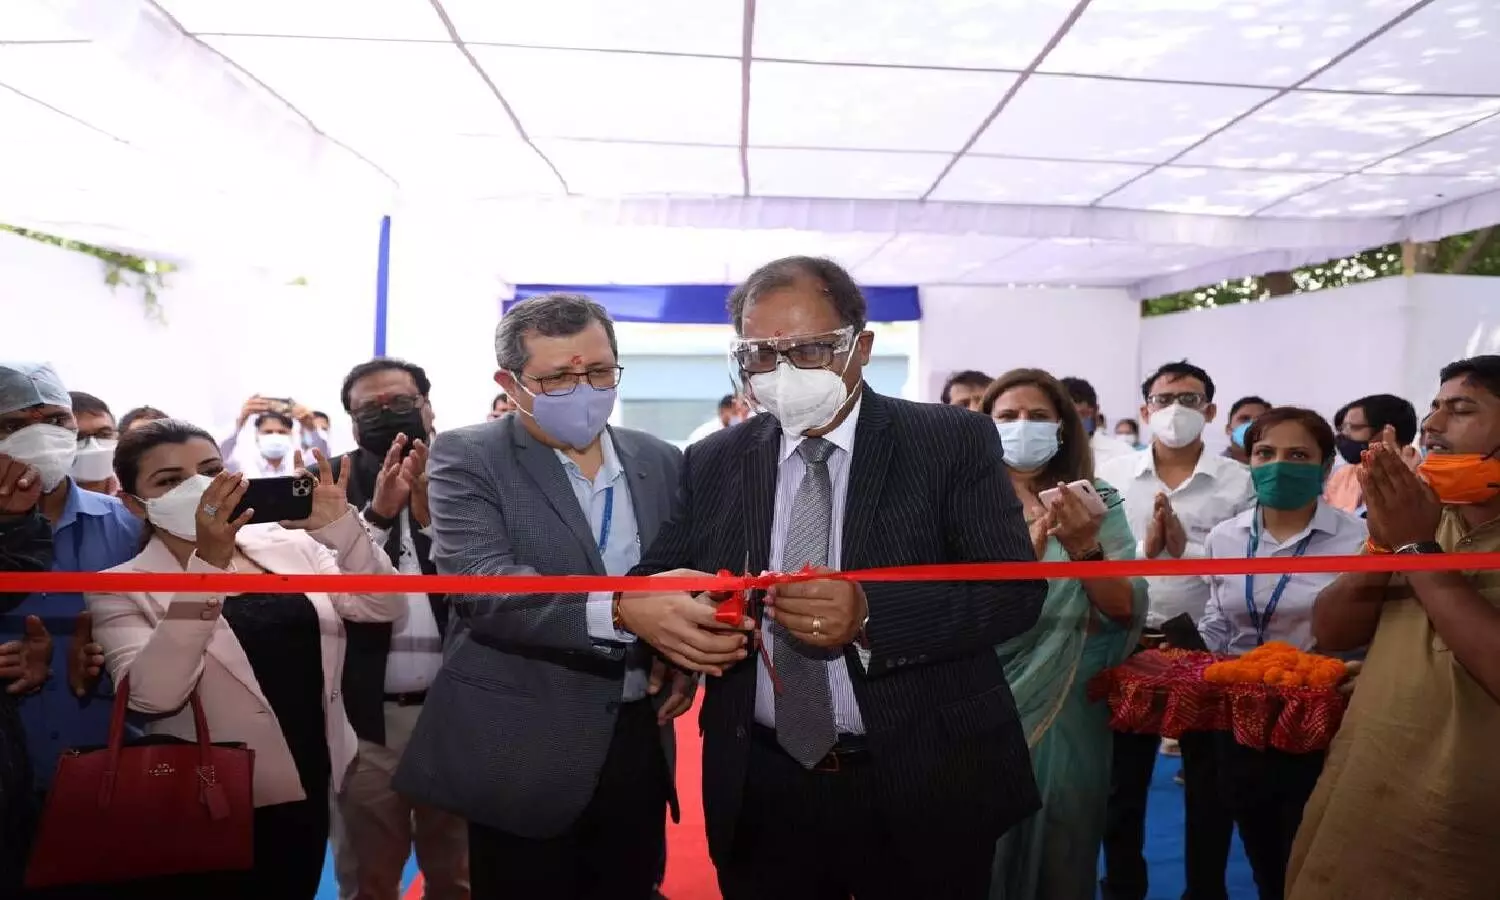 DTDC, Narayana Health launches O2 plant in Jaipur